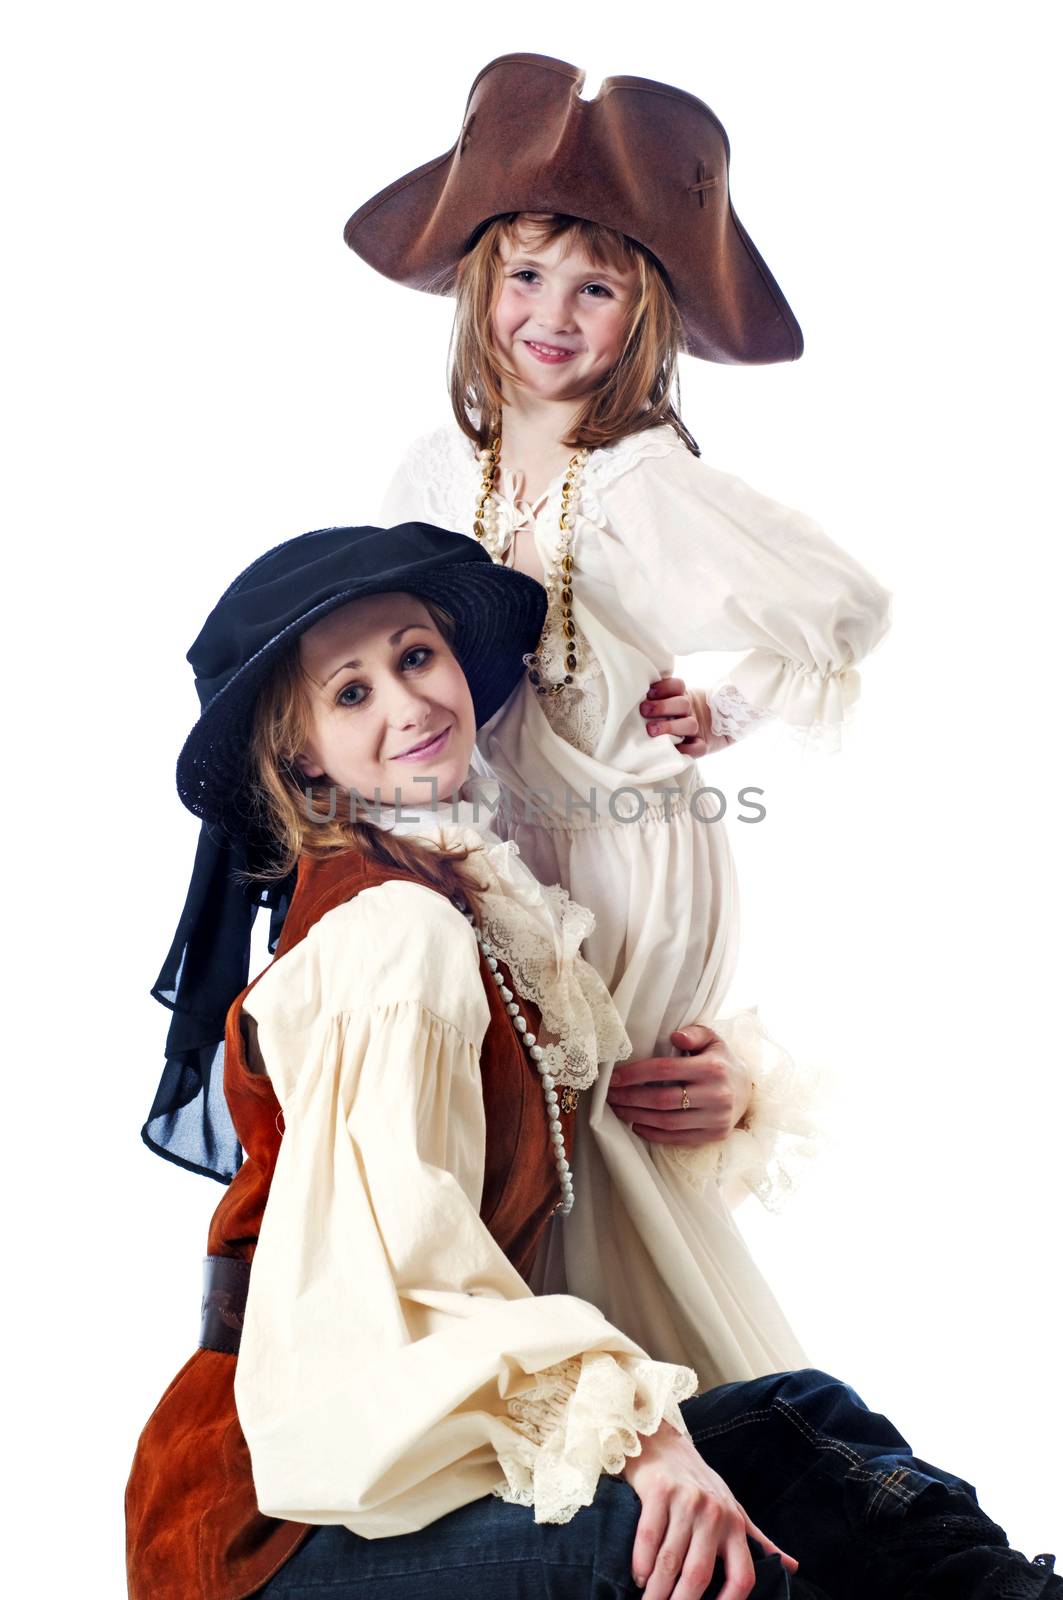 Dressing up in pirate and lady costumes.